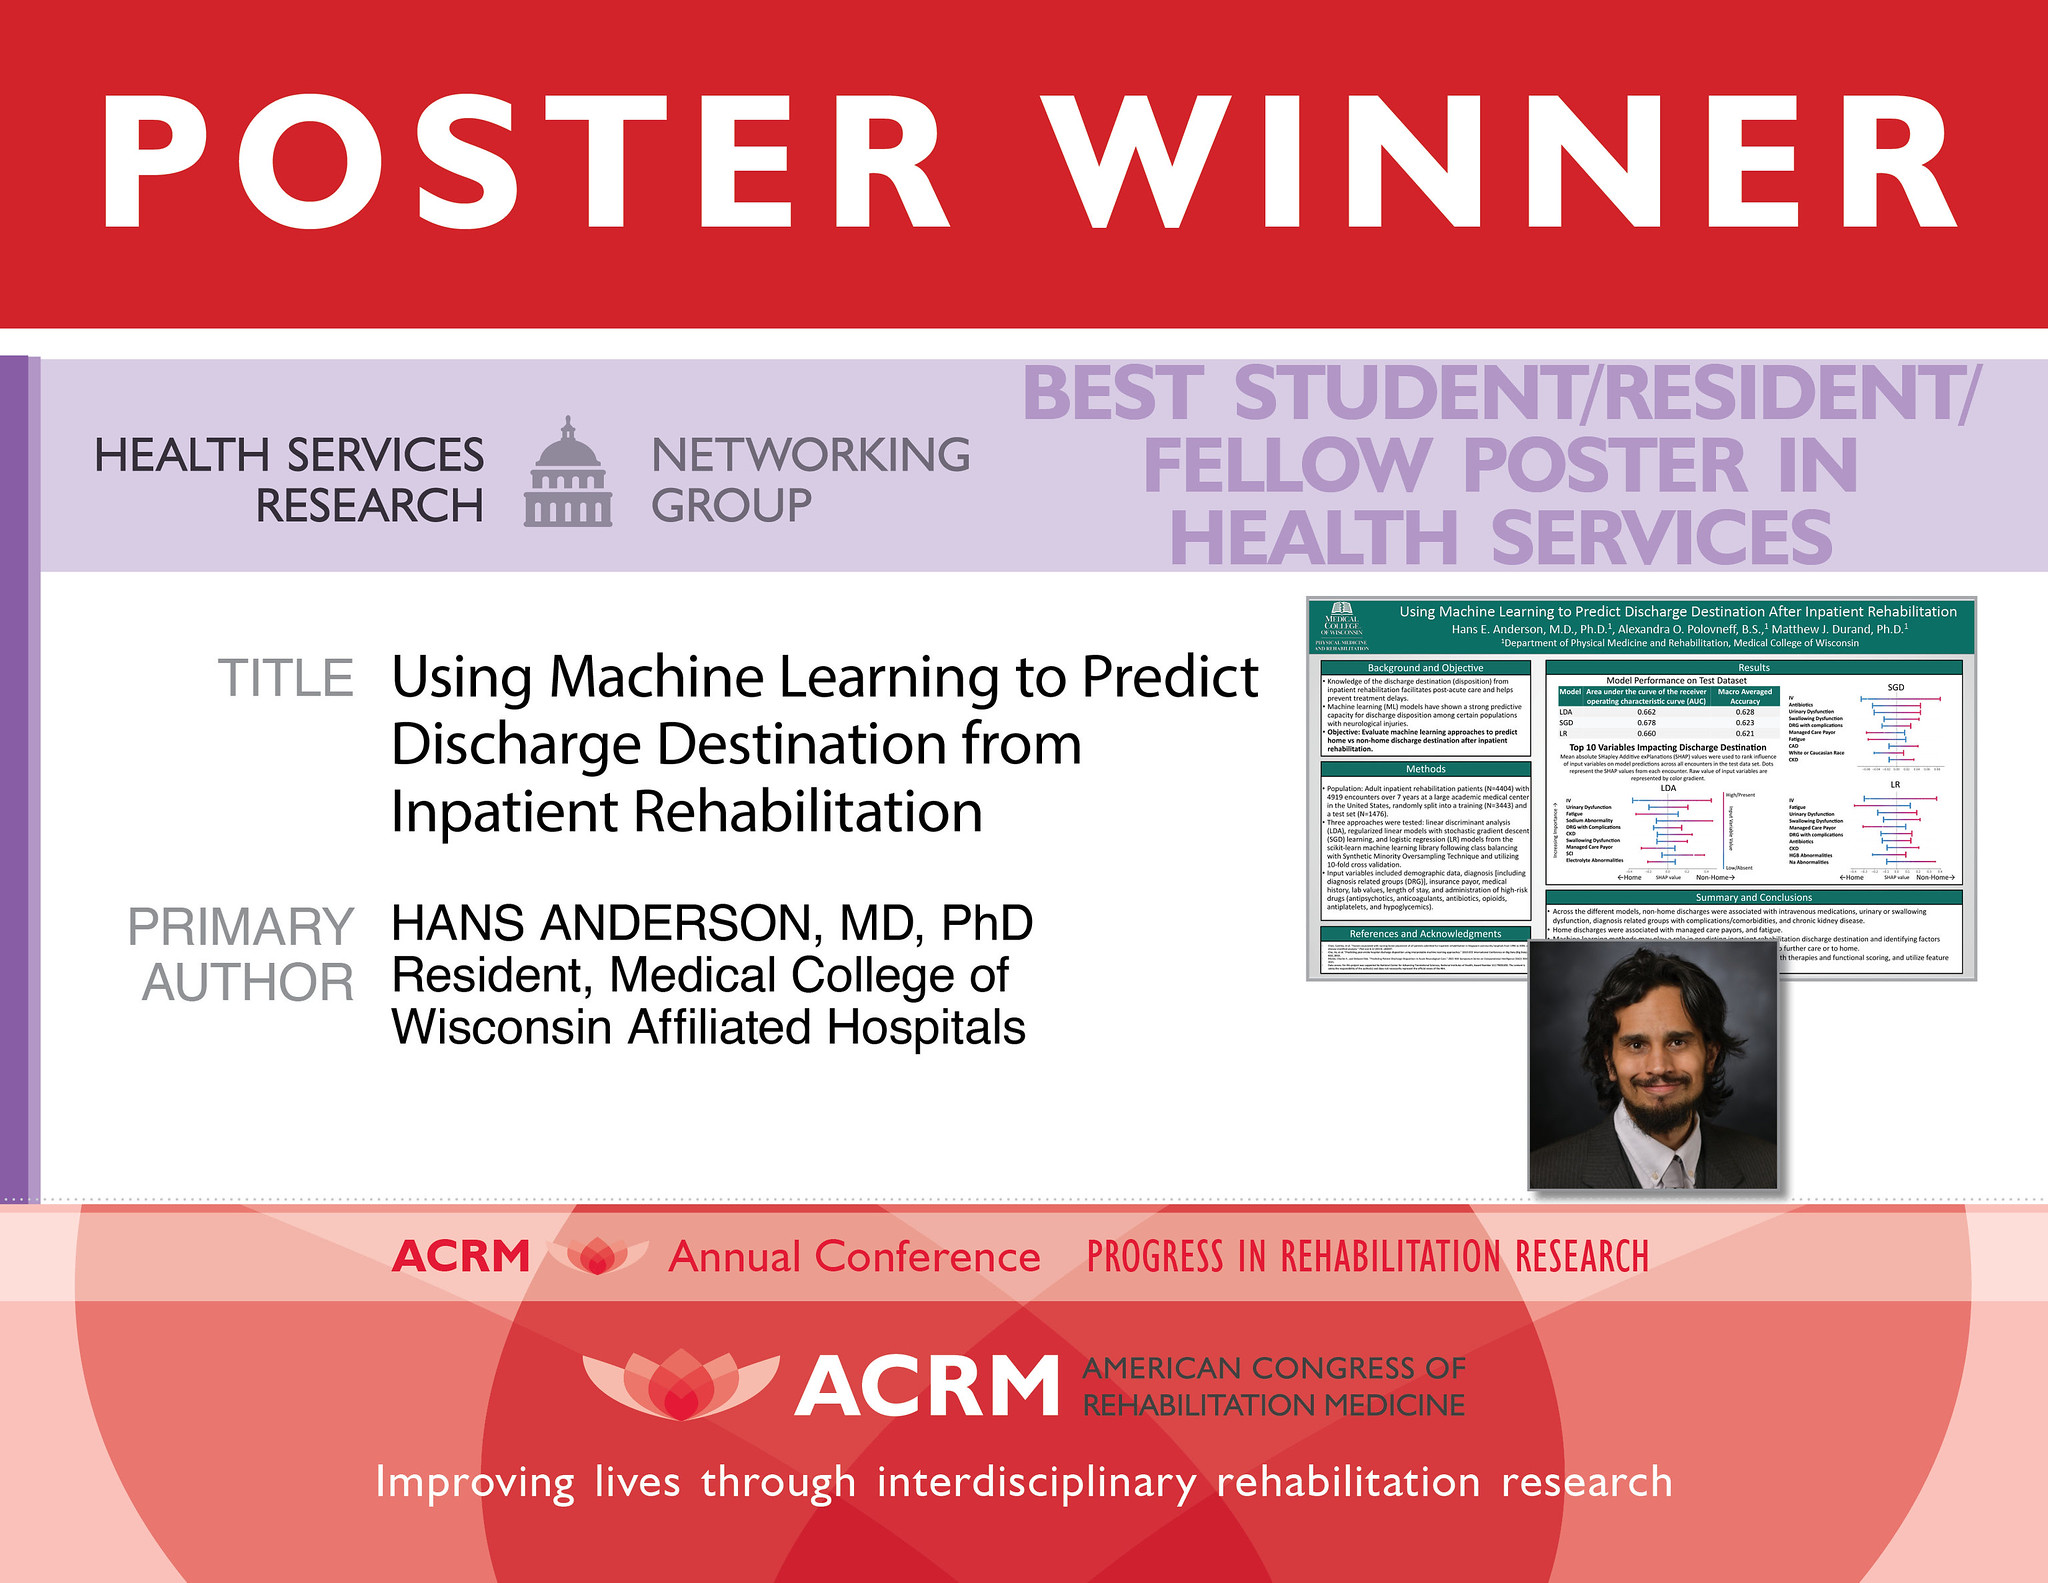 Best Overall Poster in Health Services Research